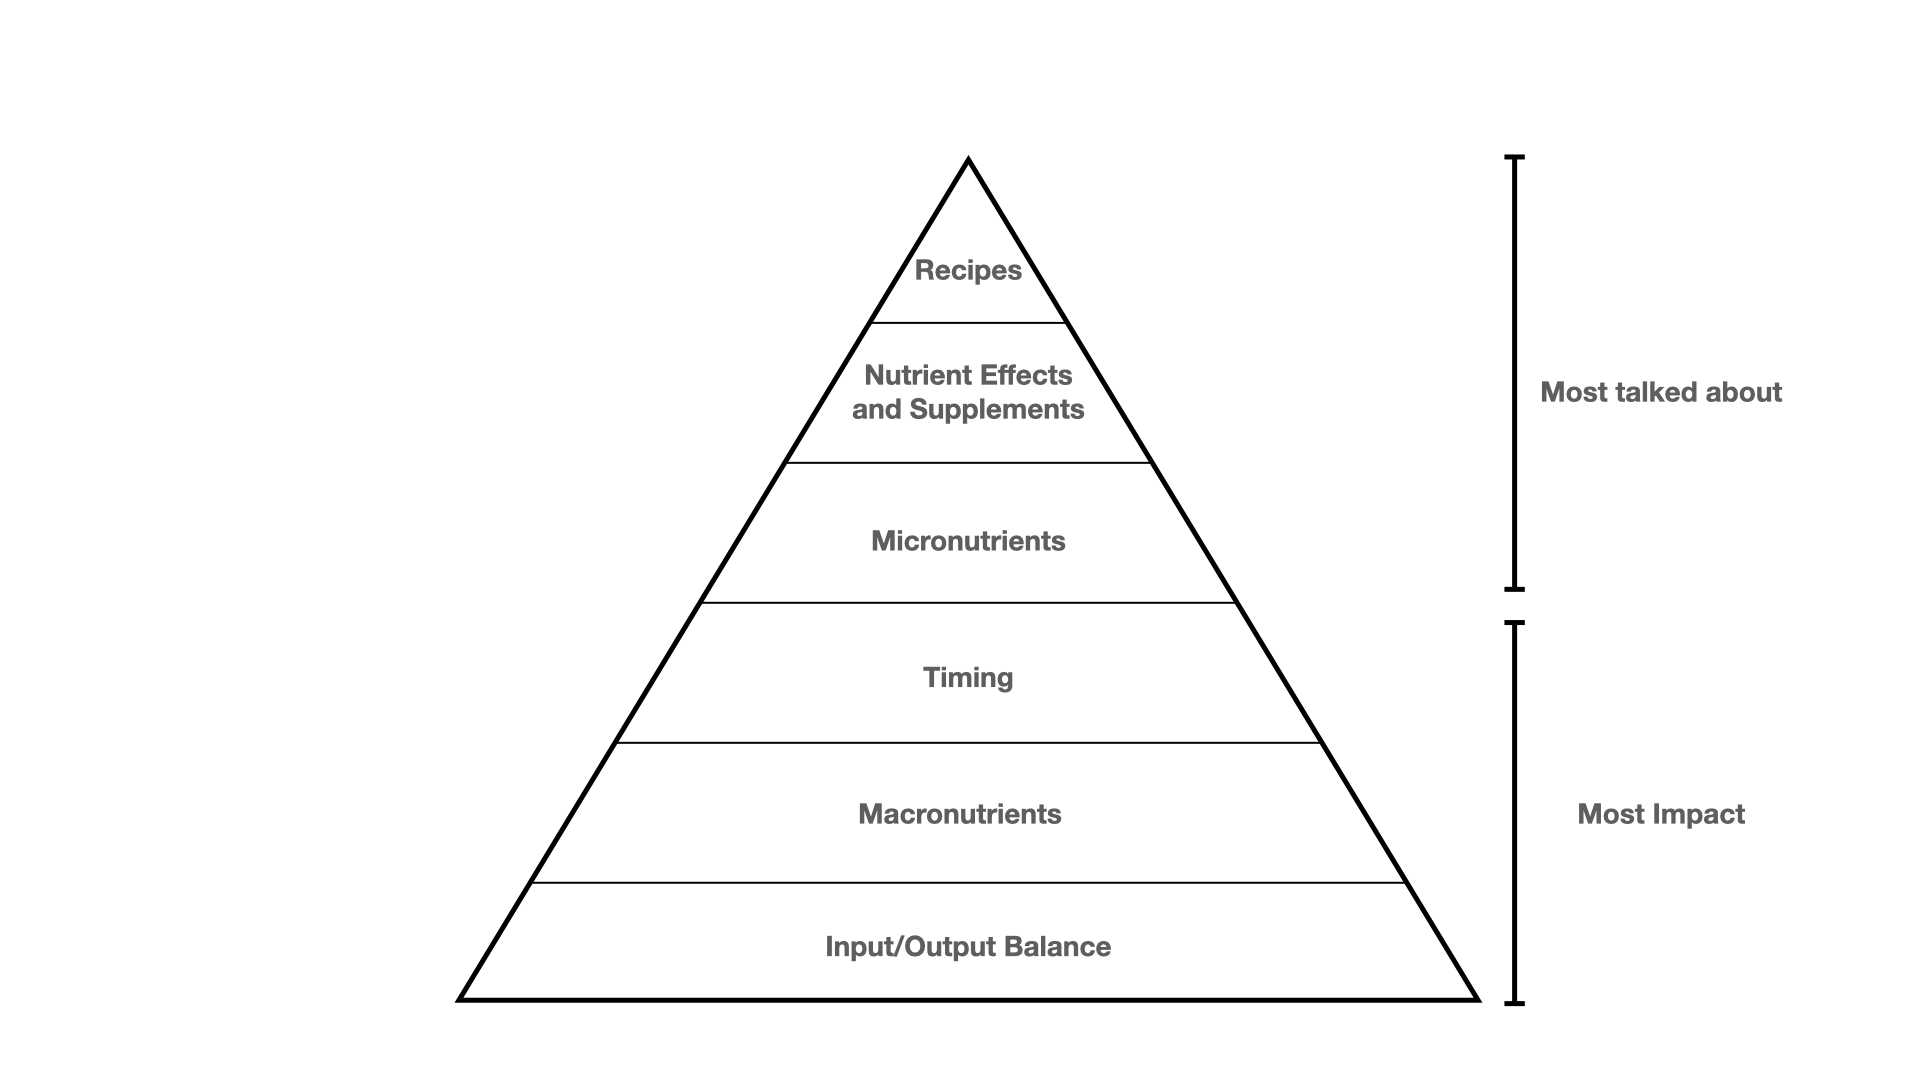 A graphical representation of the main areas of nutrition: Recipes, Nutrient Effects and Supplements, Micronutrients, Timing, Macronutrients and Input/Output Balance